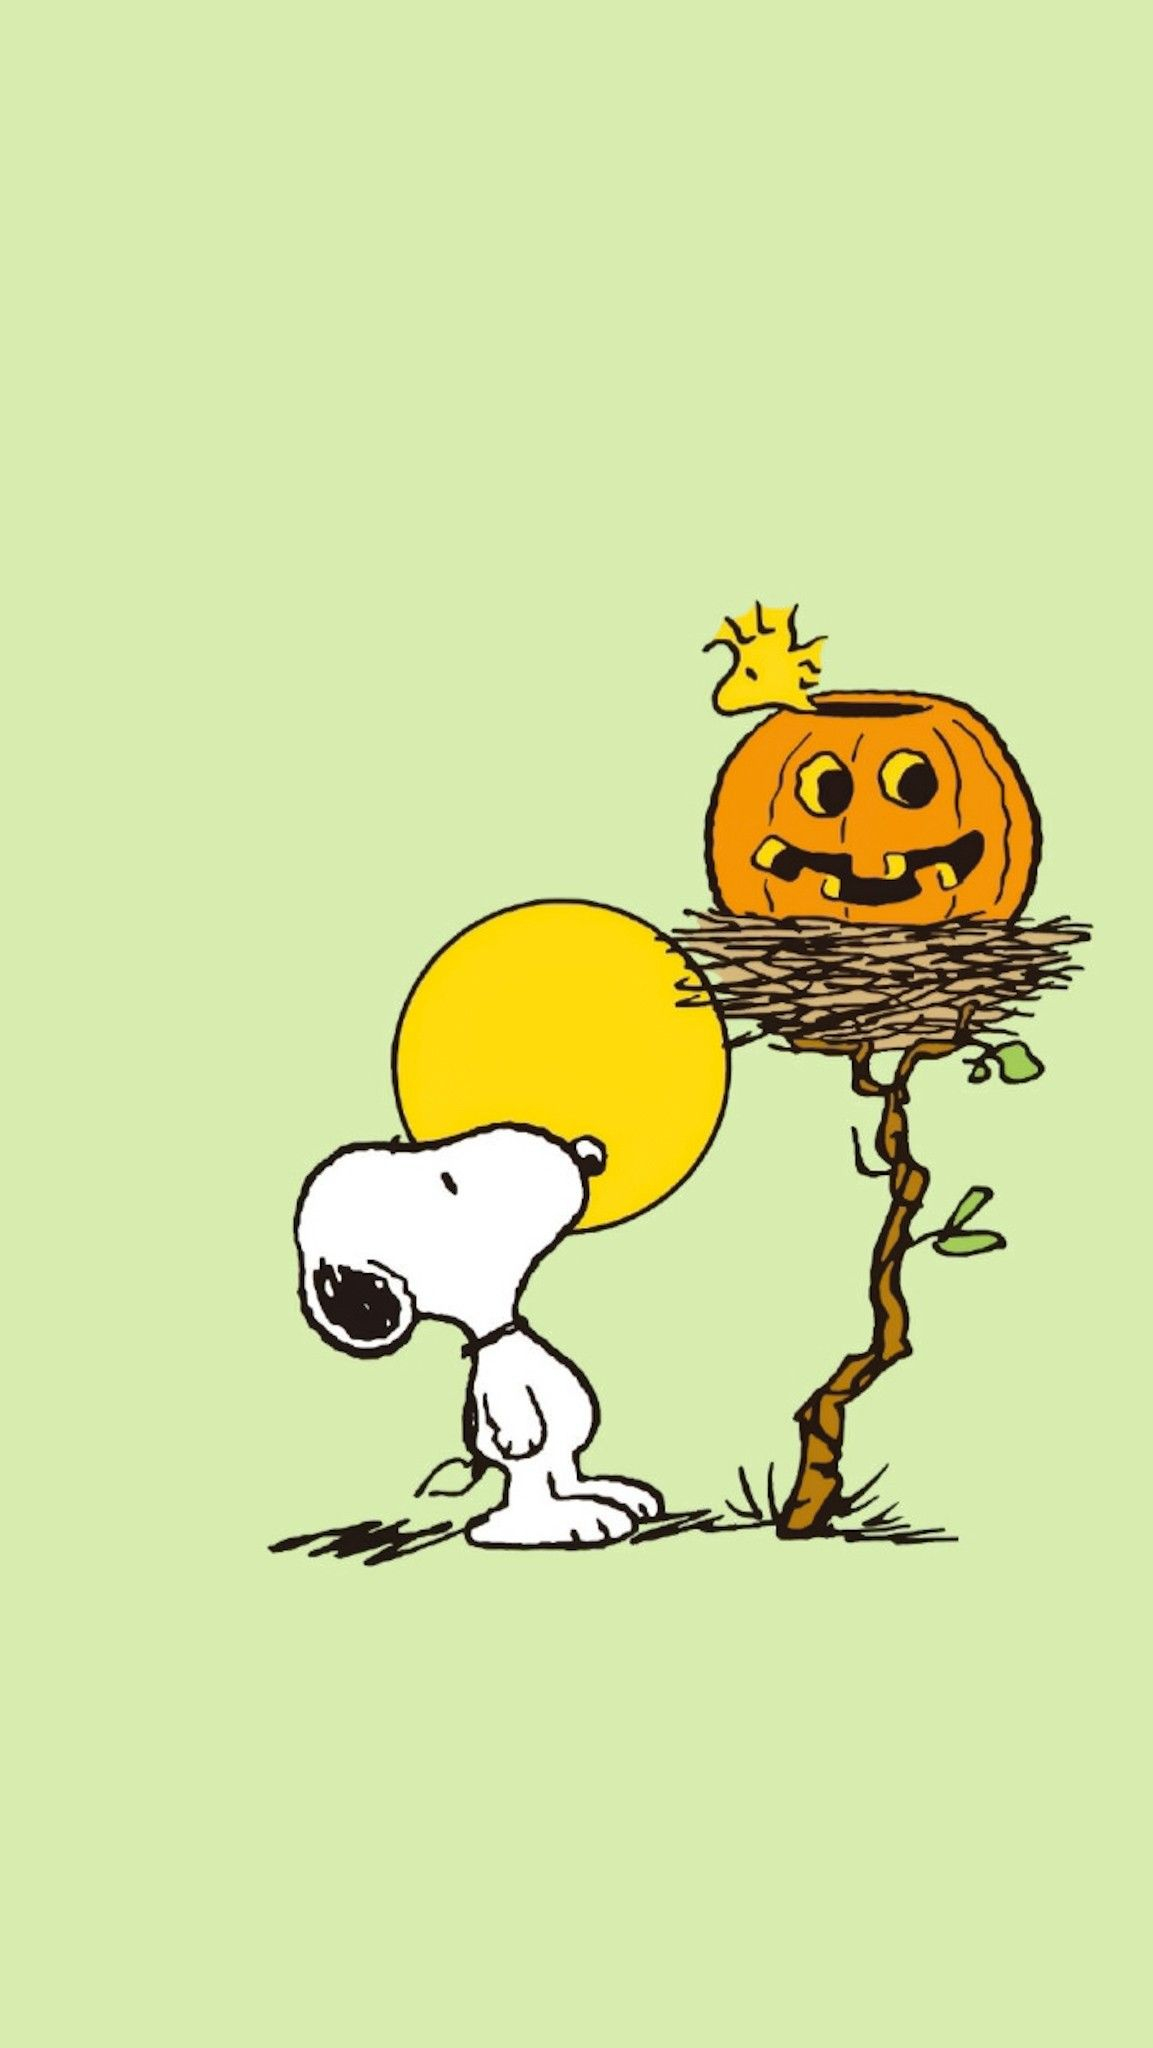 1153x2048 Pin by Aekkalisa on Snoopy | Snoopy wallpaper, Snoopy pictures, Snoopy hallowee